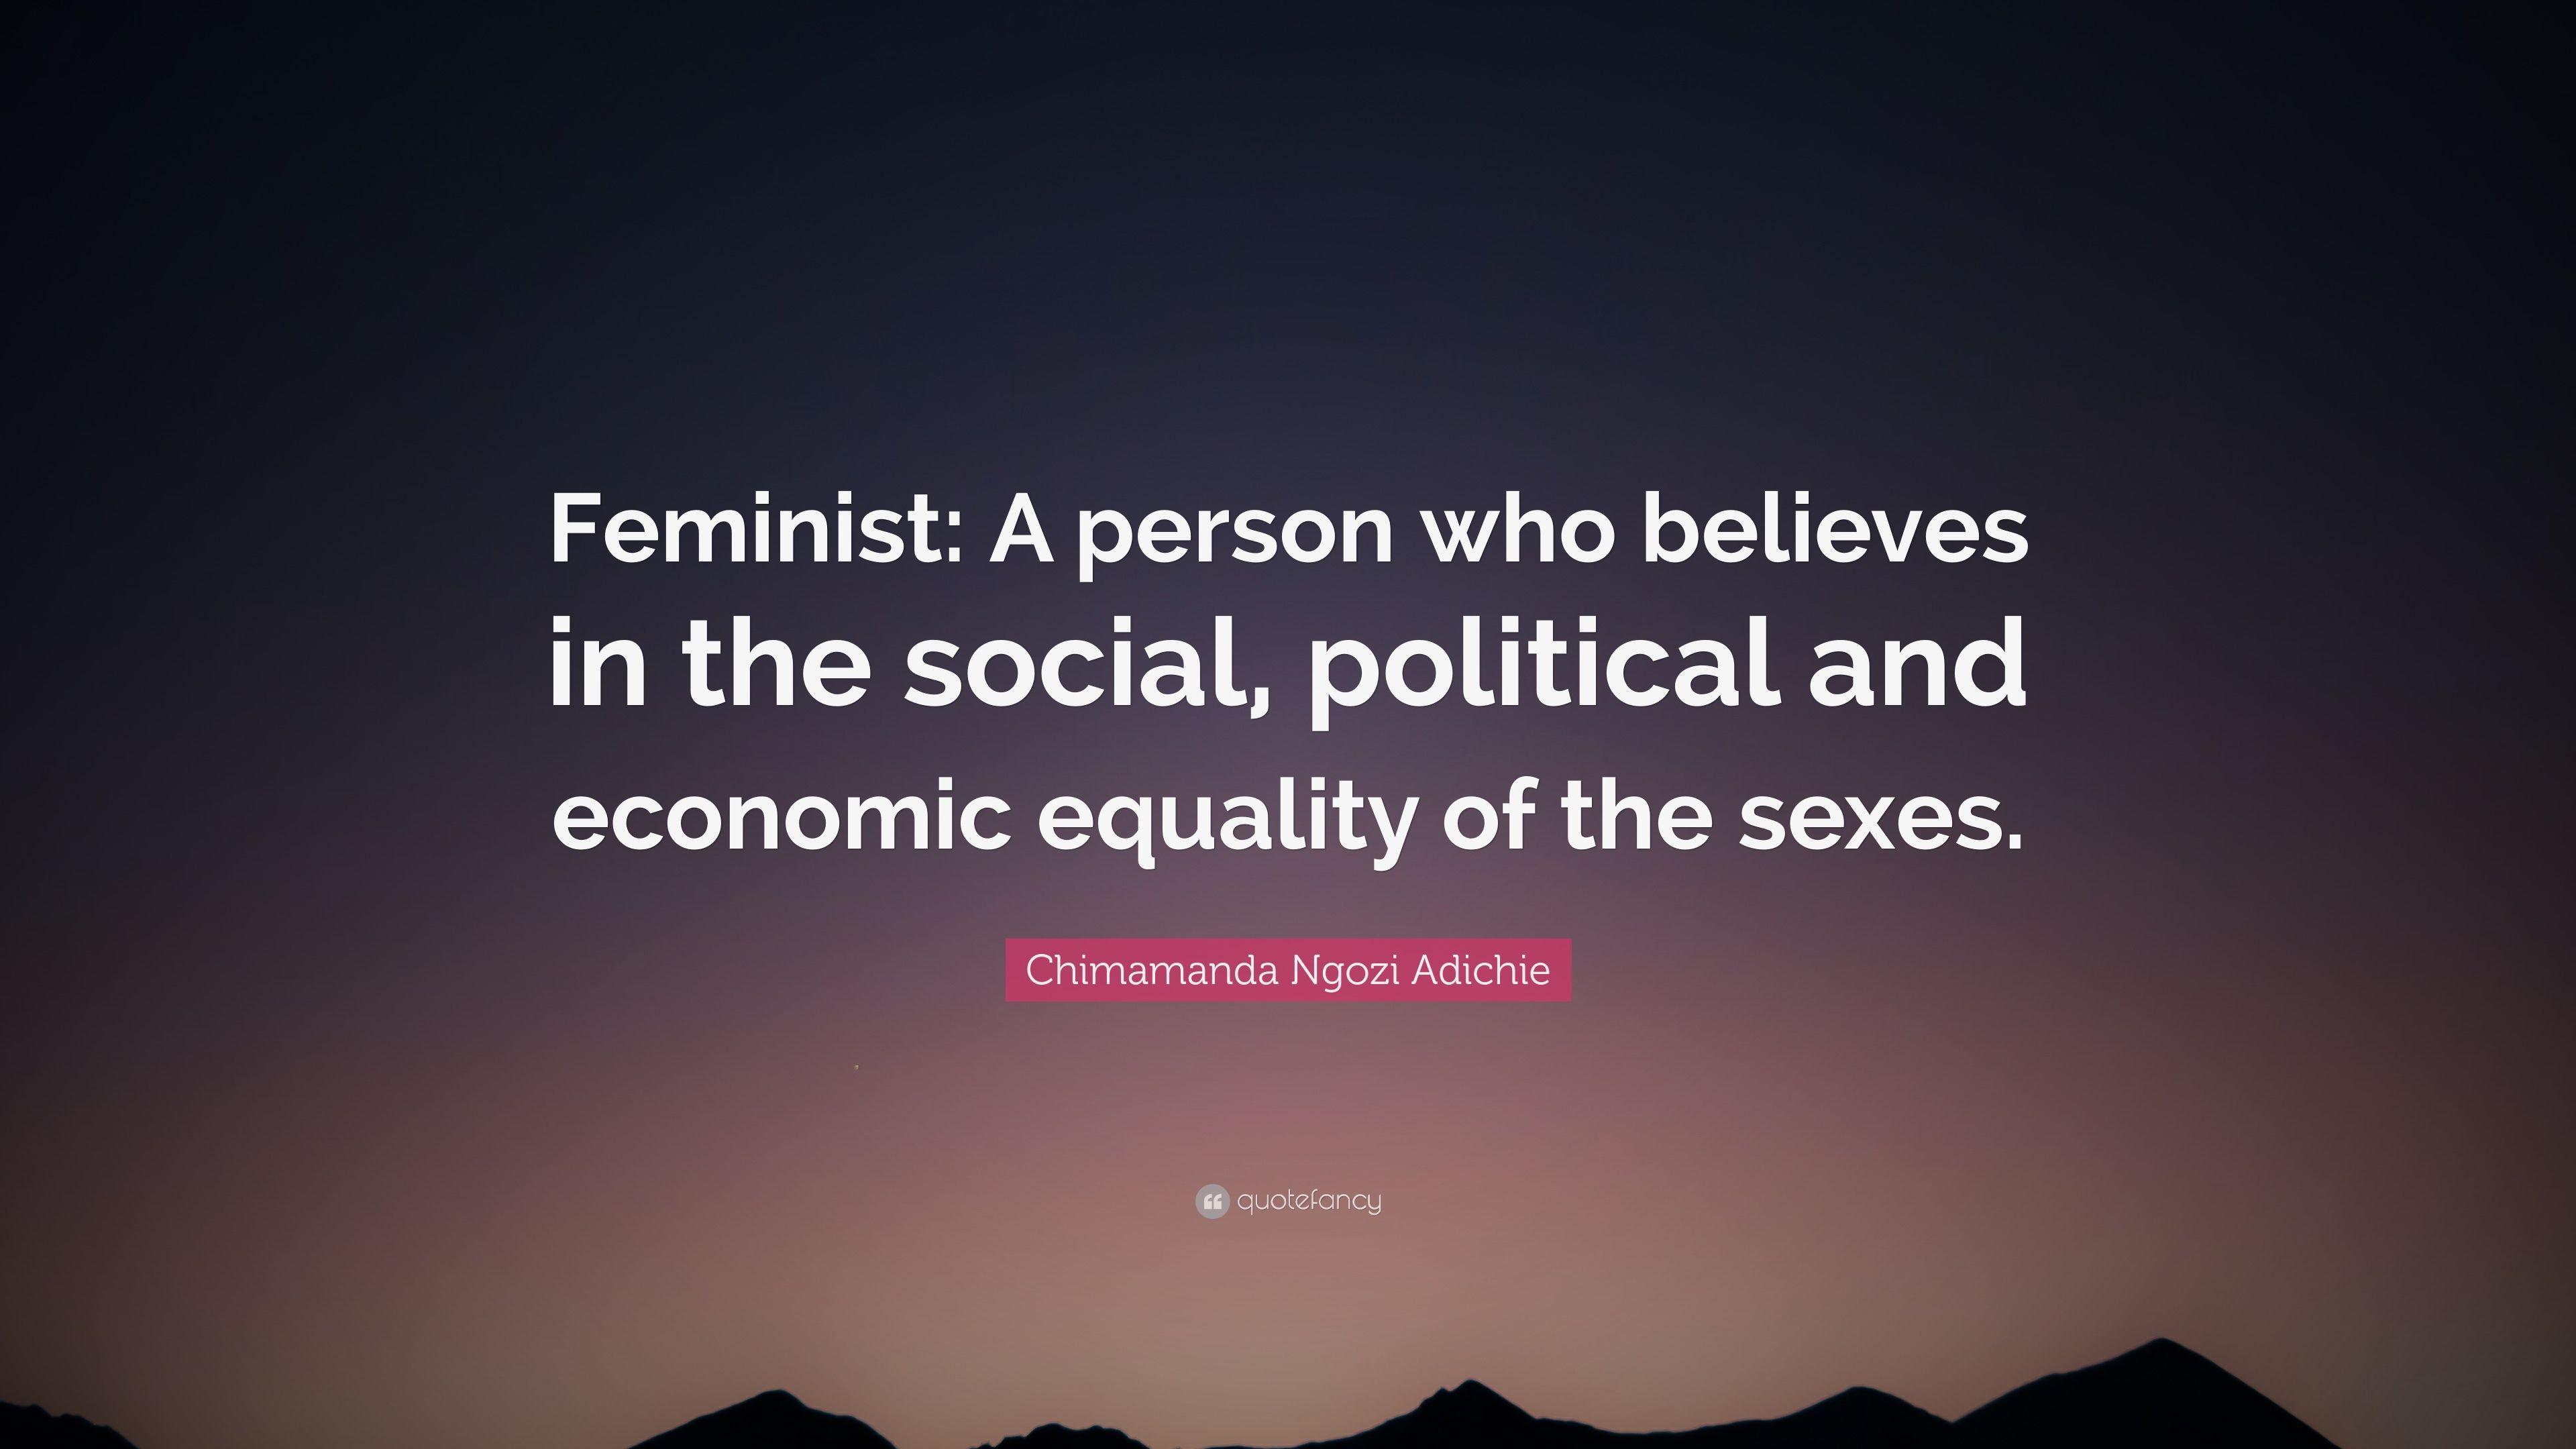 Chimamanda Ngozi Adichie Quote: “Feminist: A person who believes